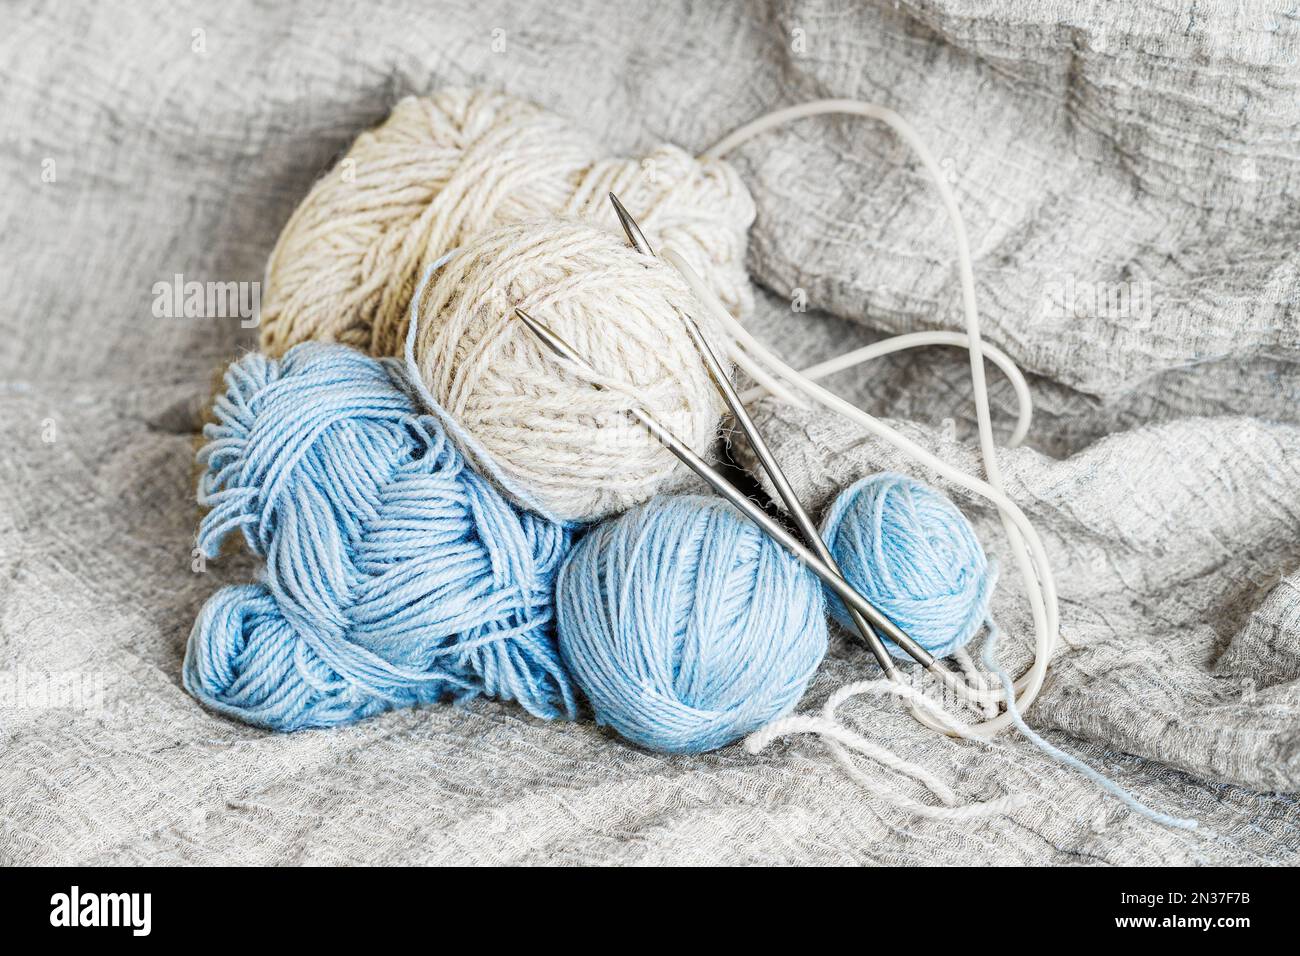 Closeup of Skeins of wool yarn and knitting needles on light background. Knitting, hobby, handicraft concept Stock Photo